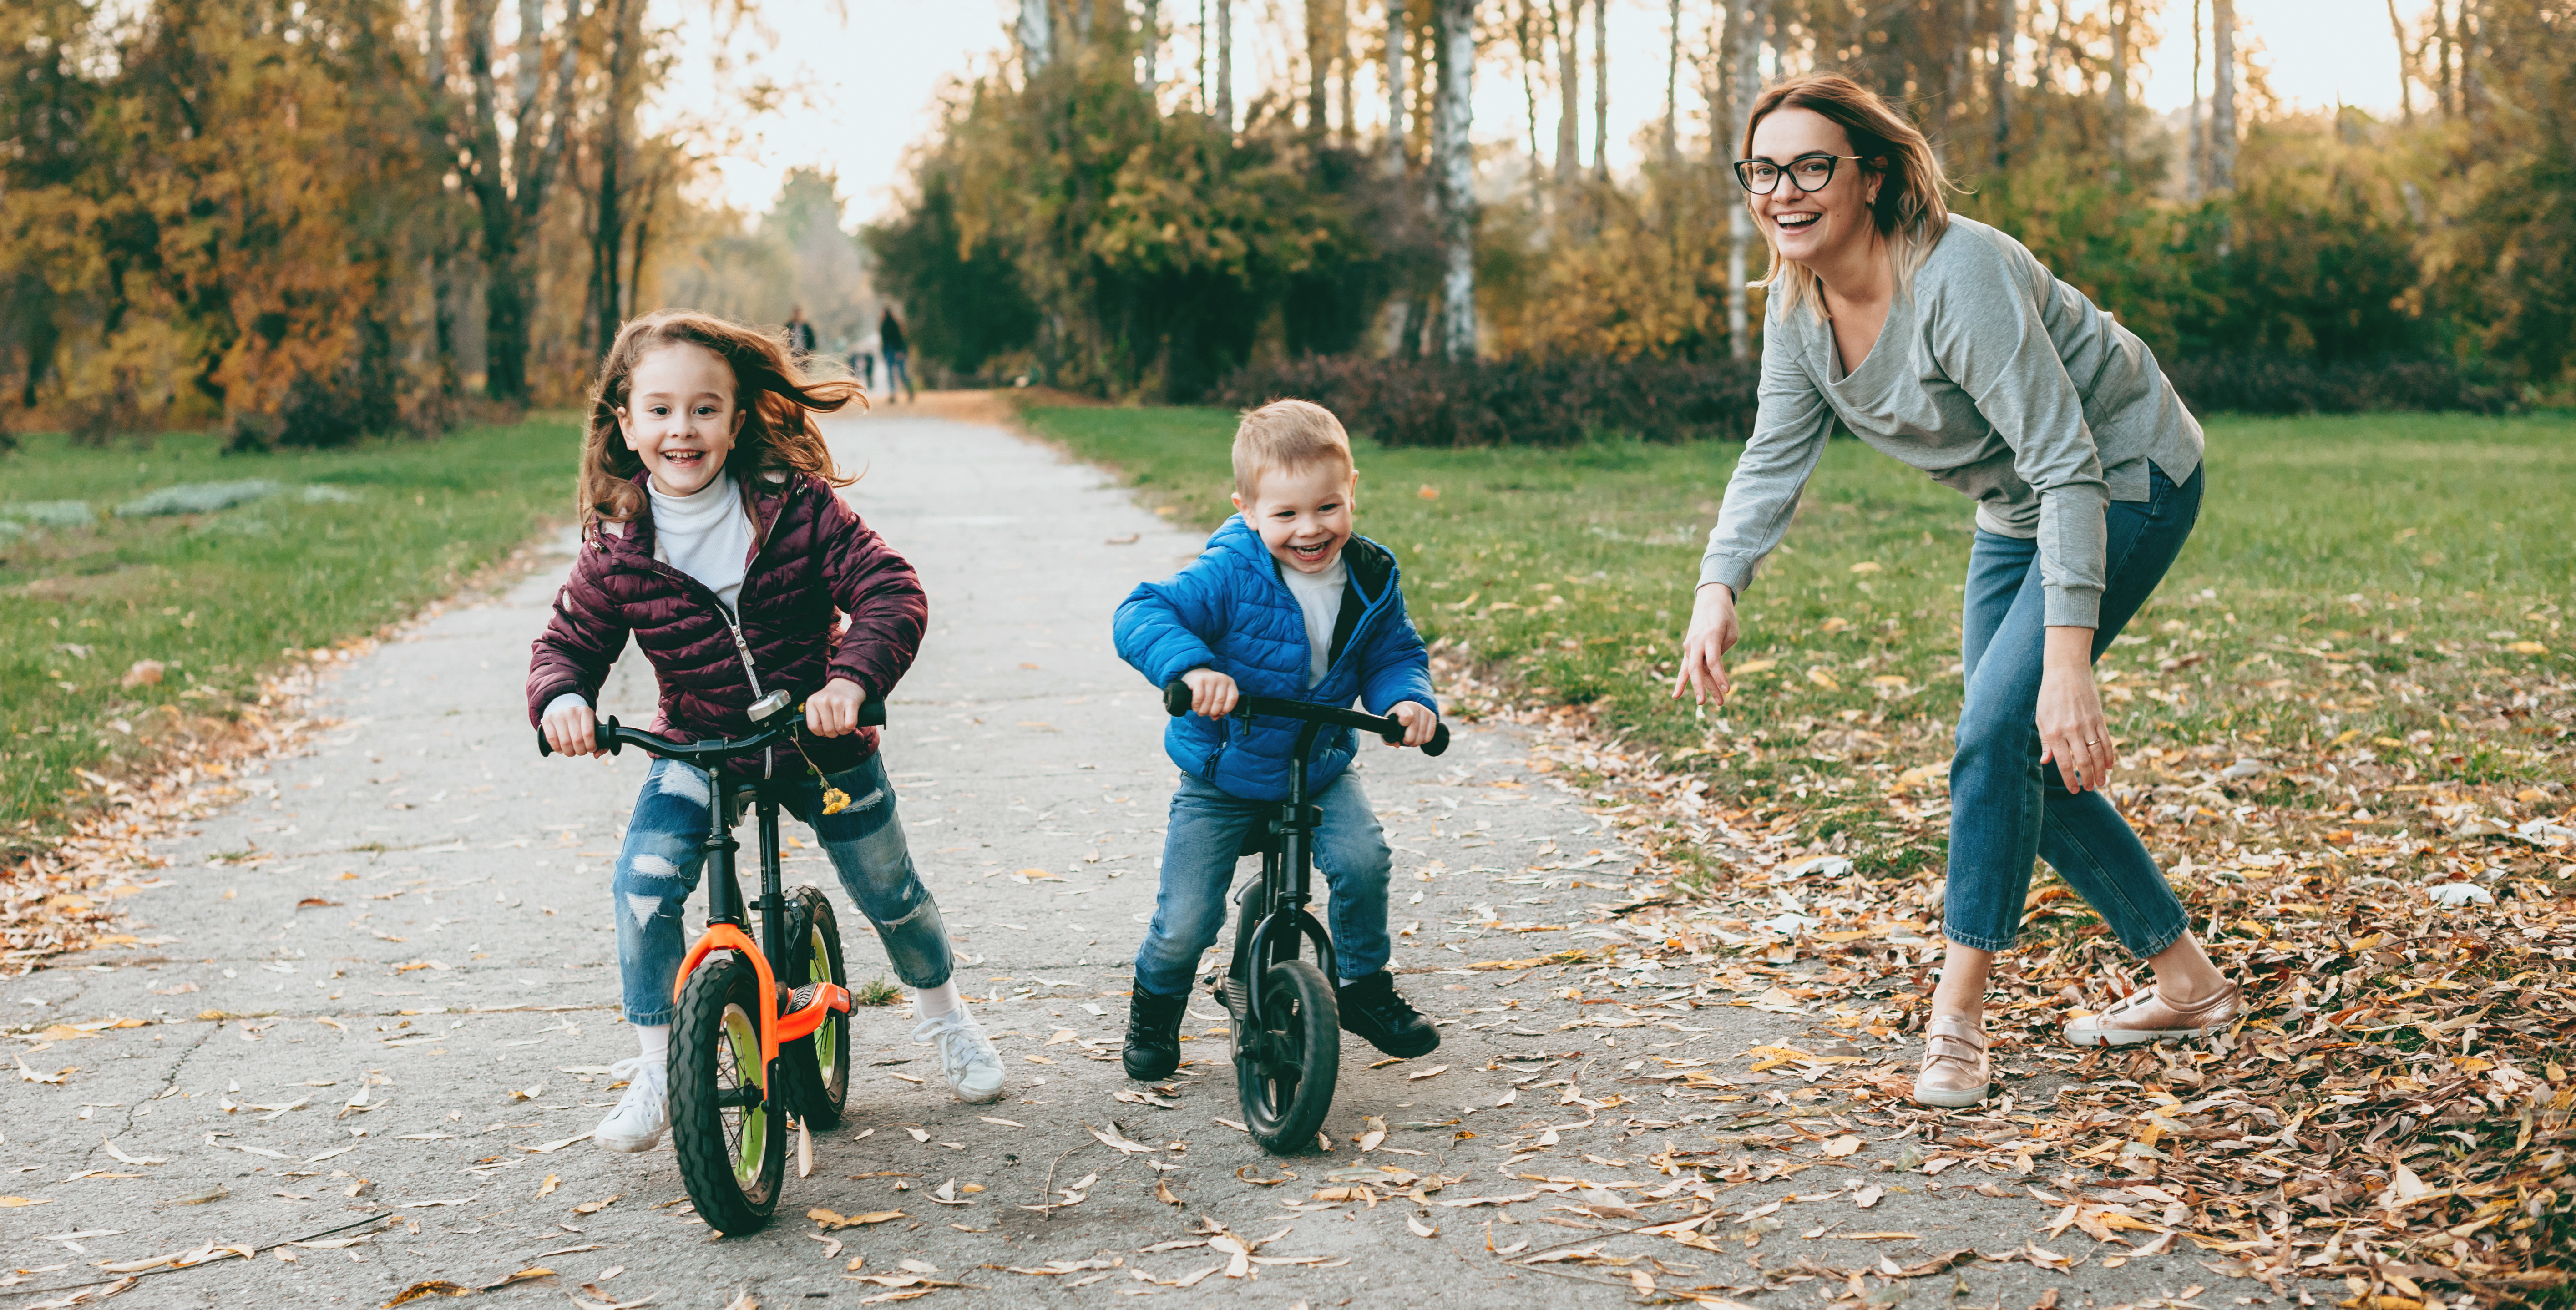 a parent and two young children ride bikes on a greenway